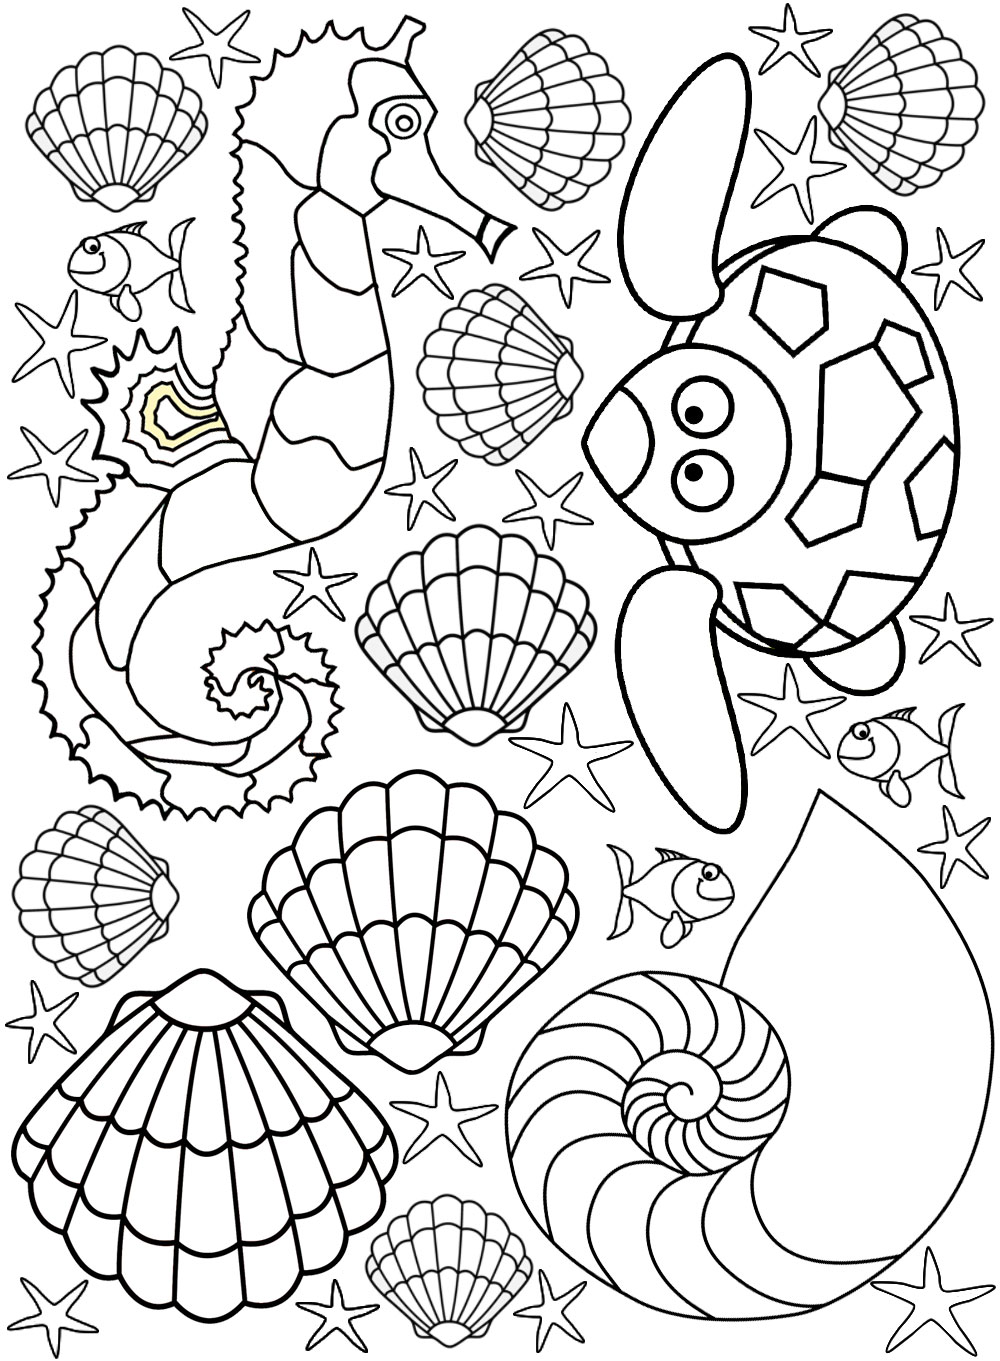 seaside-creatures-colouring-page-rooftop-post-printables